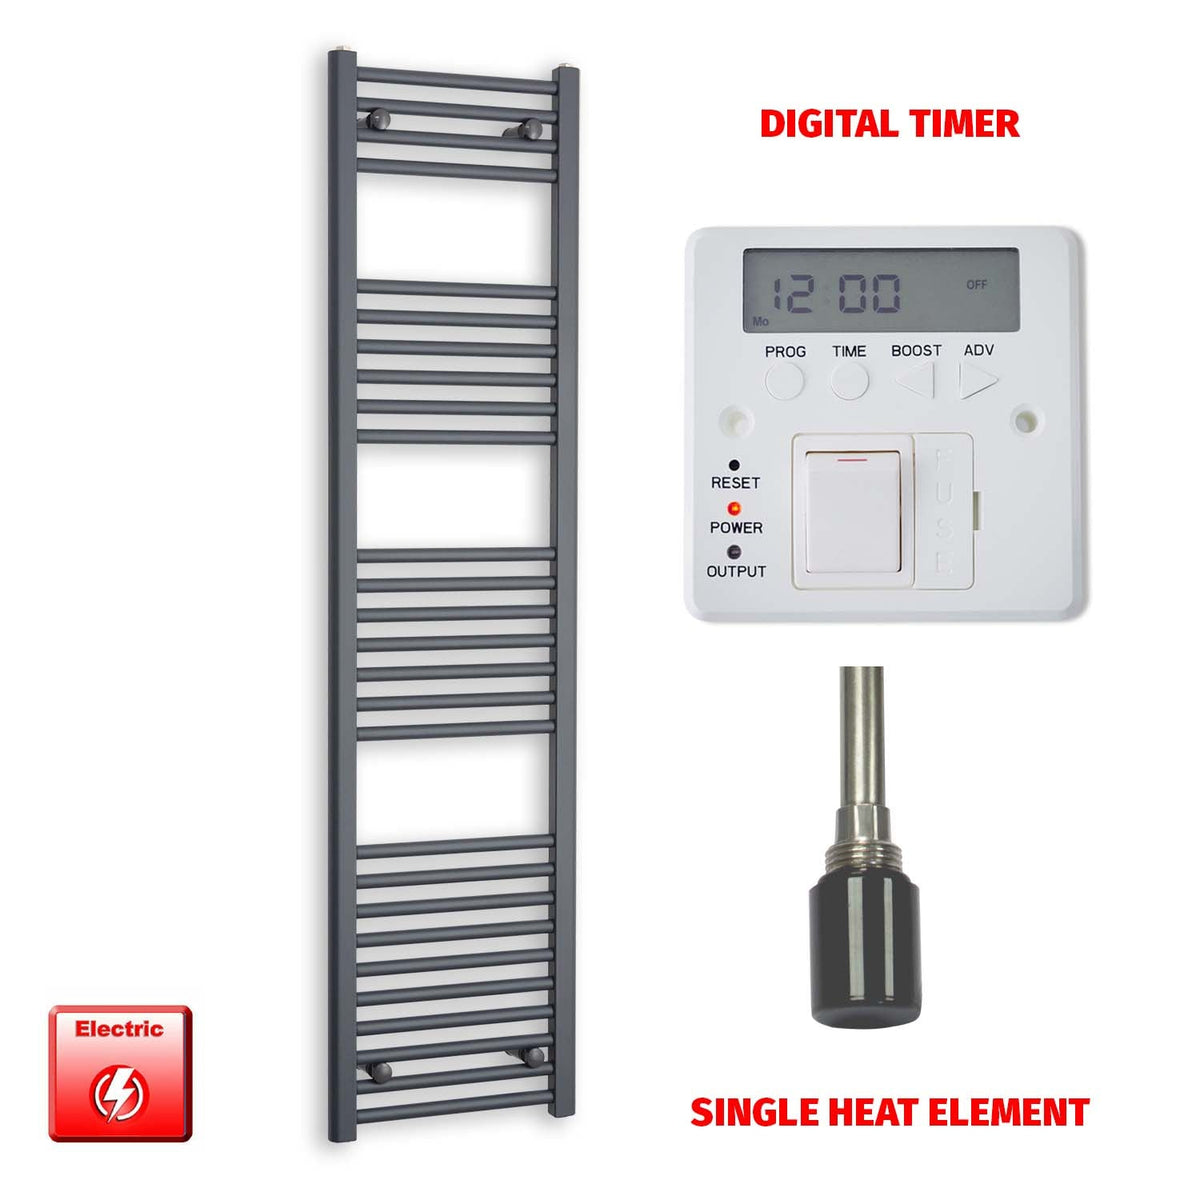 1600mm High 400mm Wide Flat Anthracite Pre-Filled Electric Heated Towel Radiator HTR Single heat element Digital timer